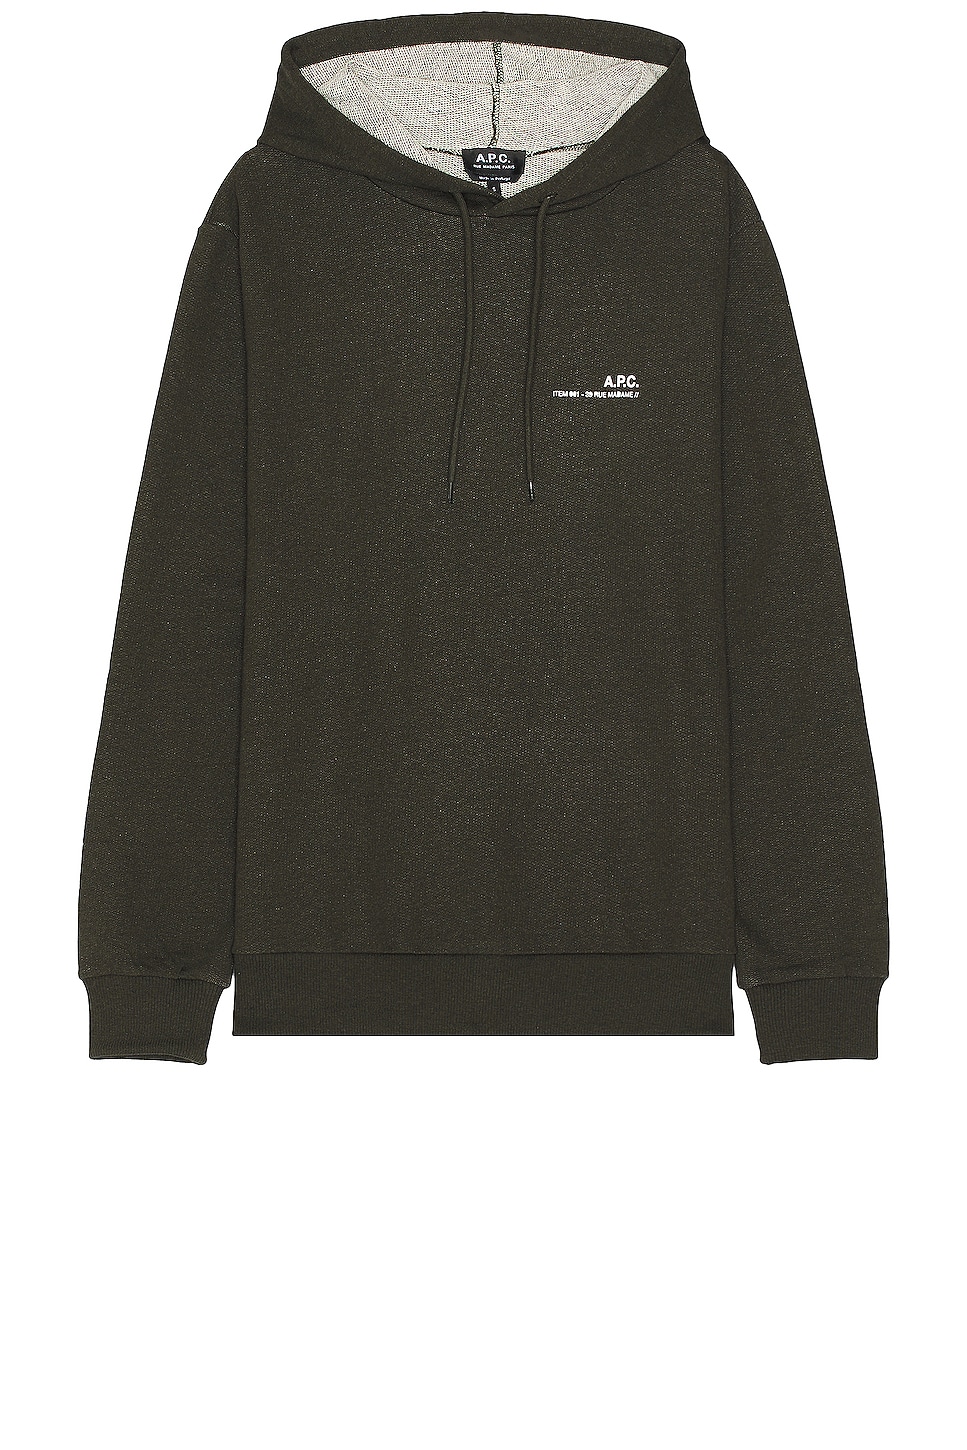 Image 1 of A.P.C. Hoodie in Khaki